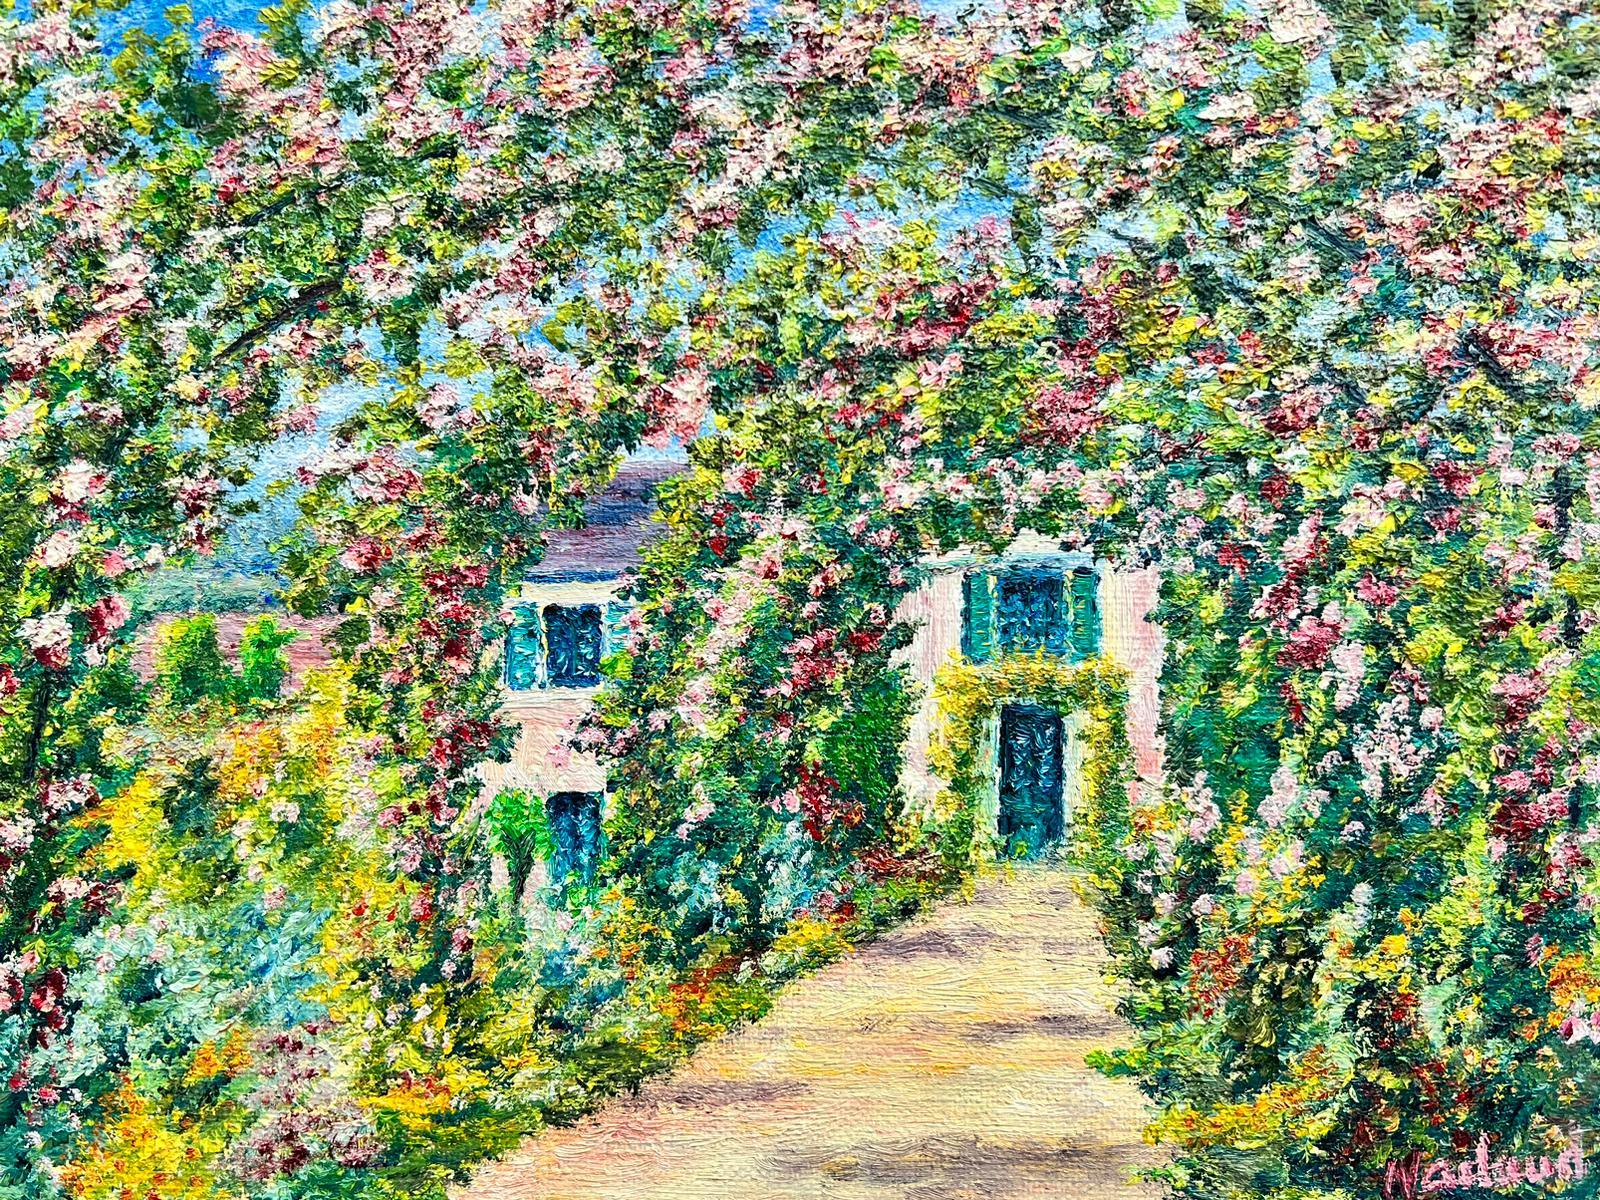 La Rosaire
Monet's Garden, Giverny
French School, signed
inscribed verso
oil painting on canvas, unframed
canvas: 8.75 x 10.75 inches
provenance: private collection, France
condition: very good and sound condition 
